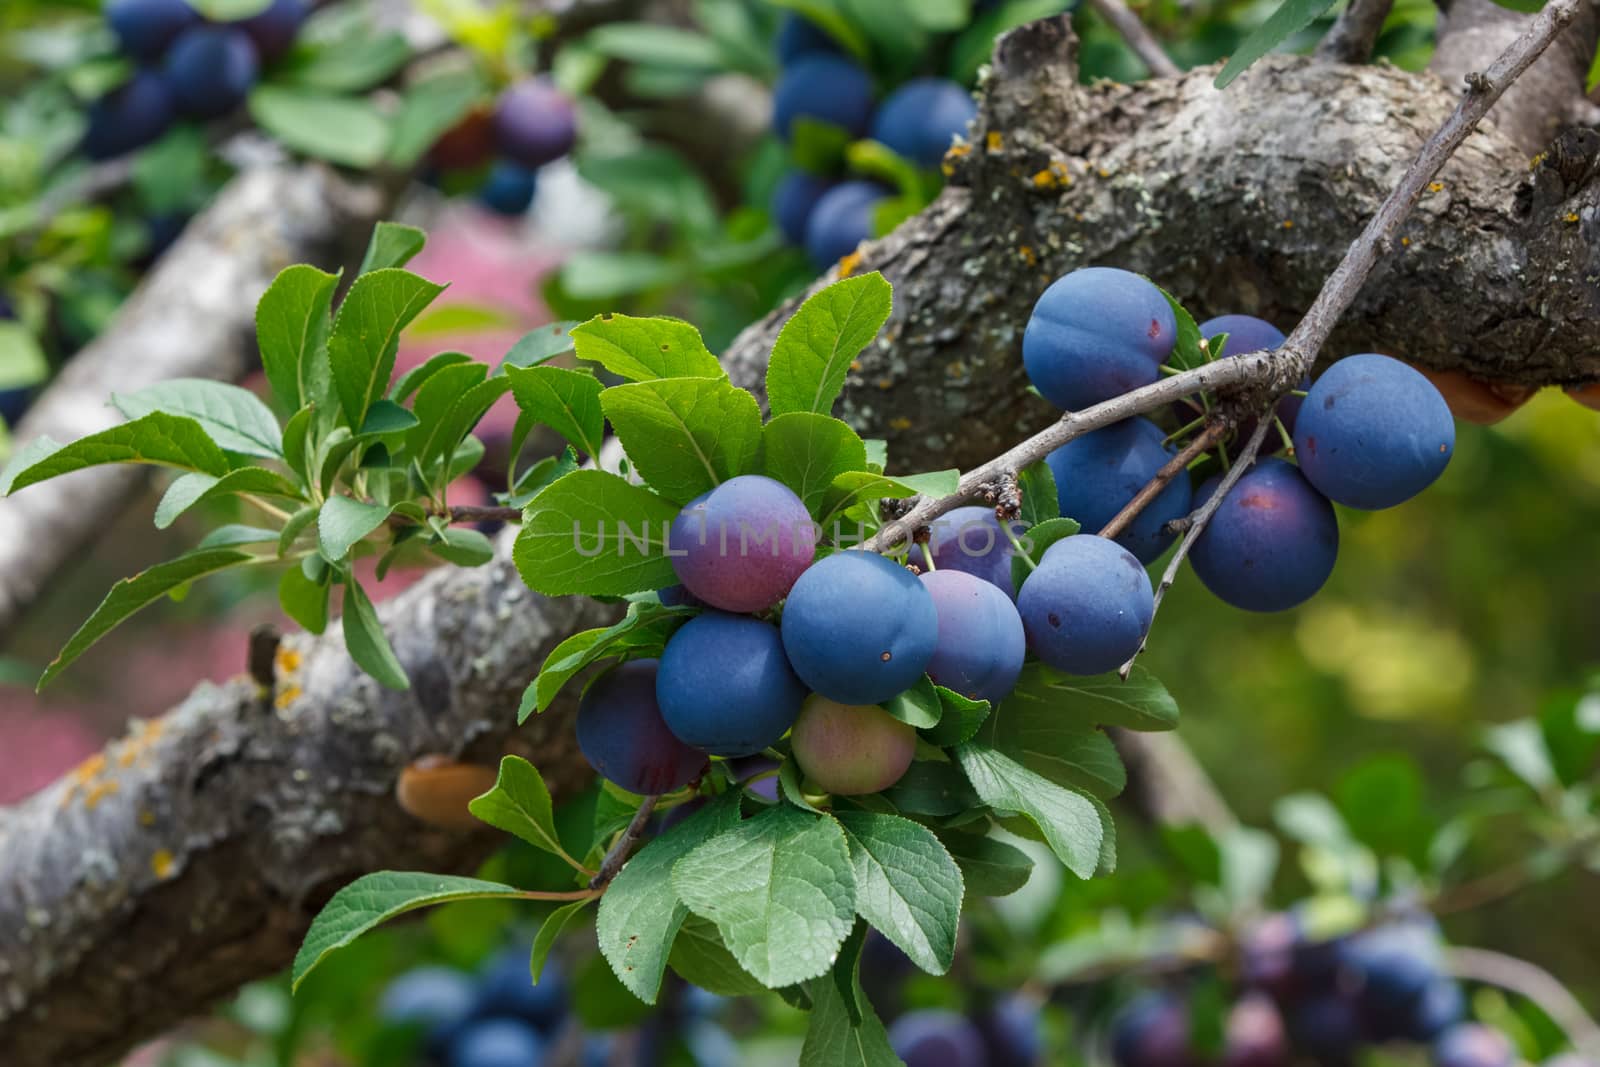 Plums on a branch of plum tree. by Slast20